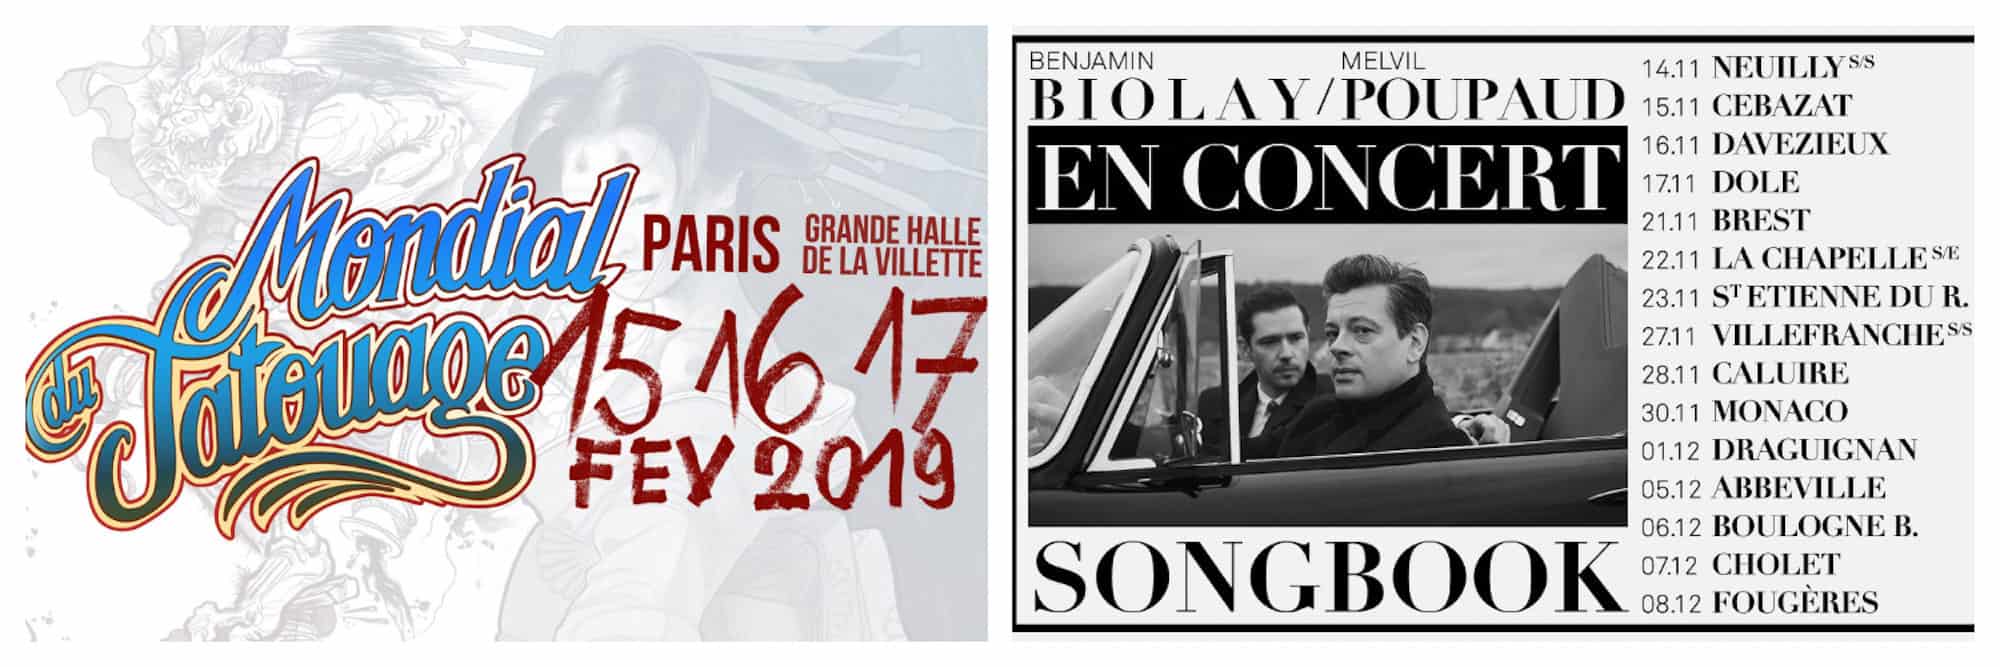 Mondial Tatouage tattoo fair takes places every February in Paris (left). Poster for French singer Benjamin Biolay Music Concert in Paris (right).